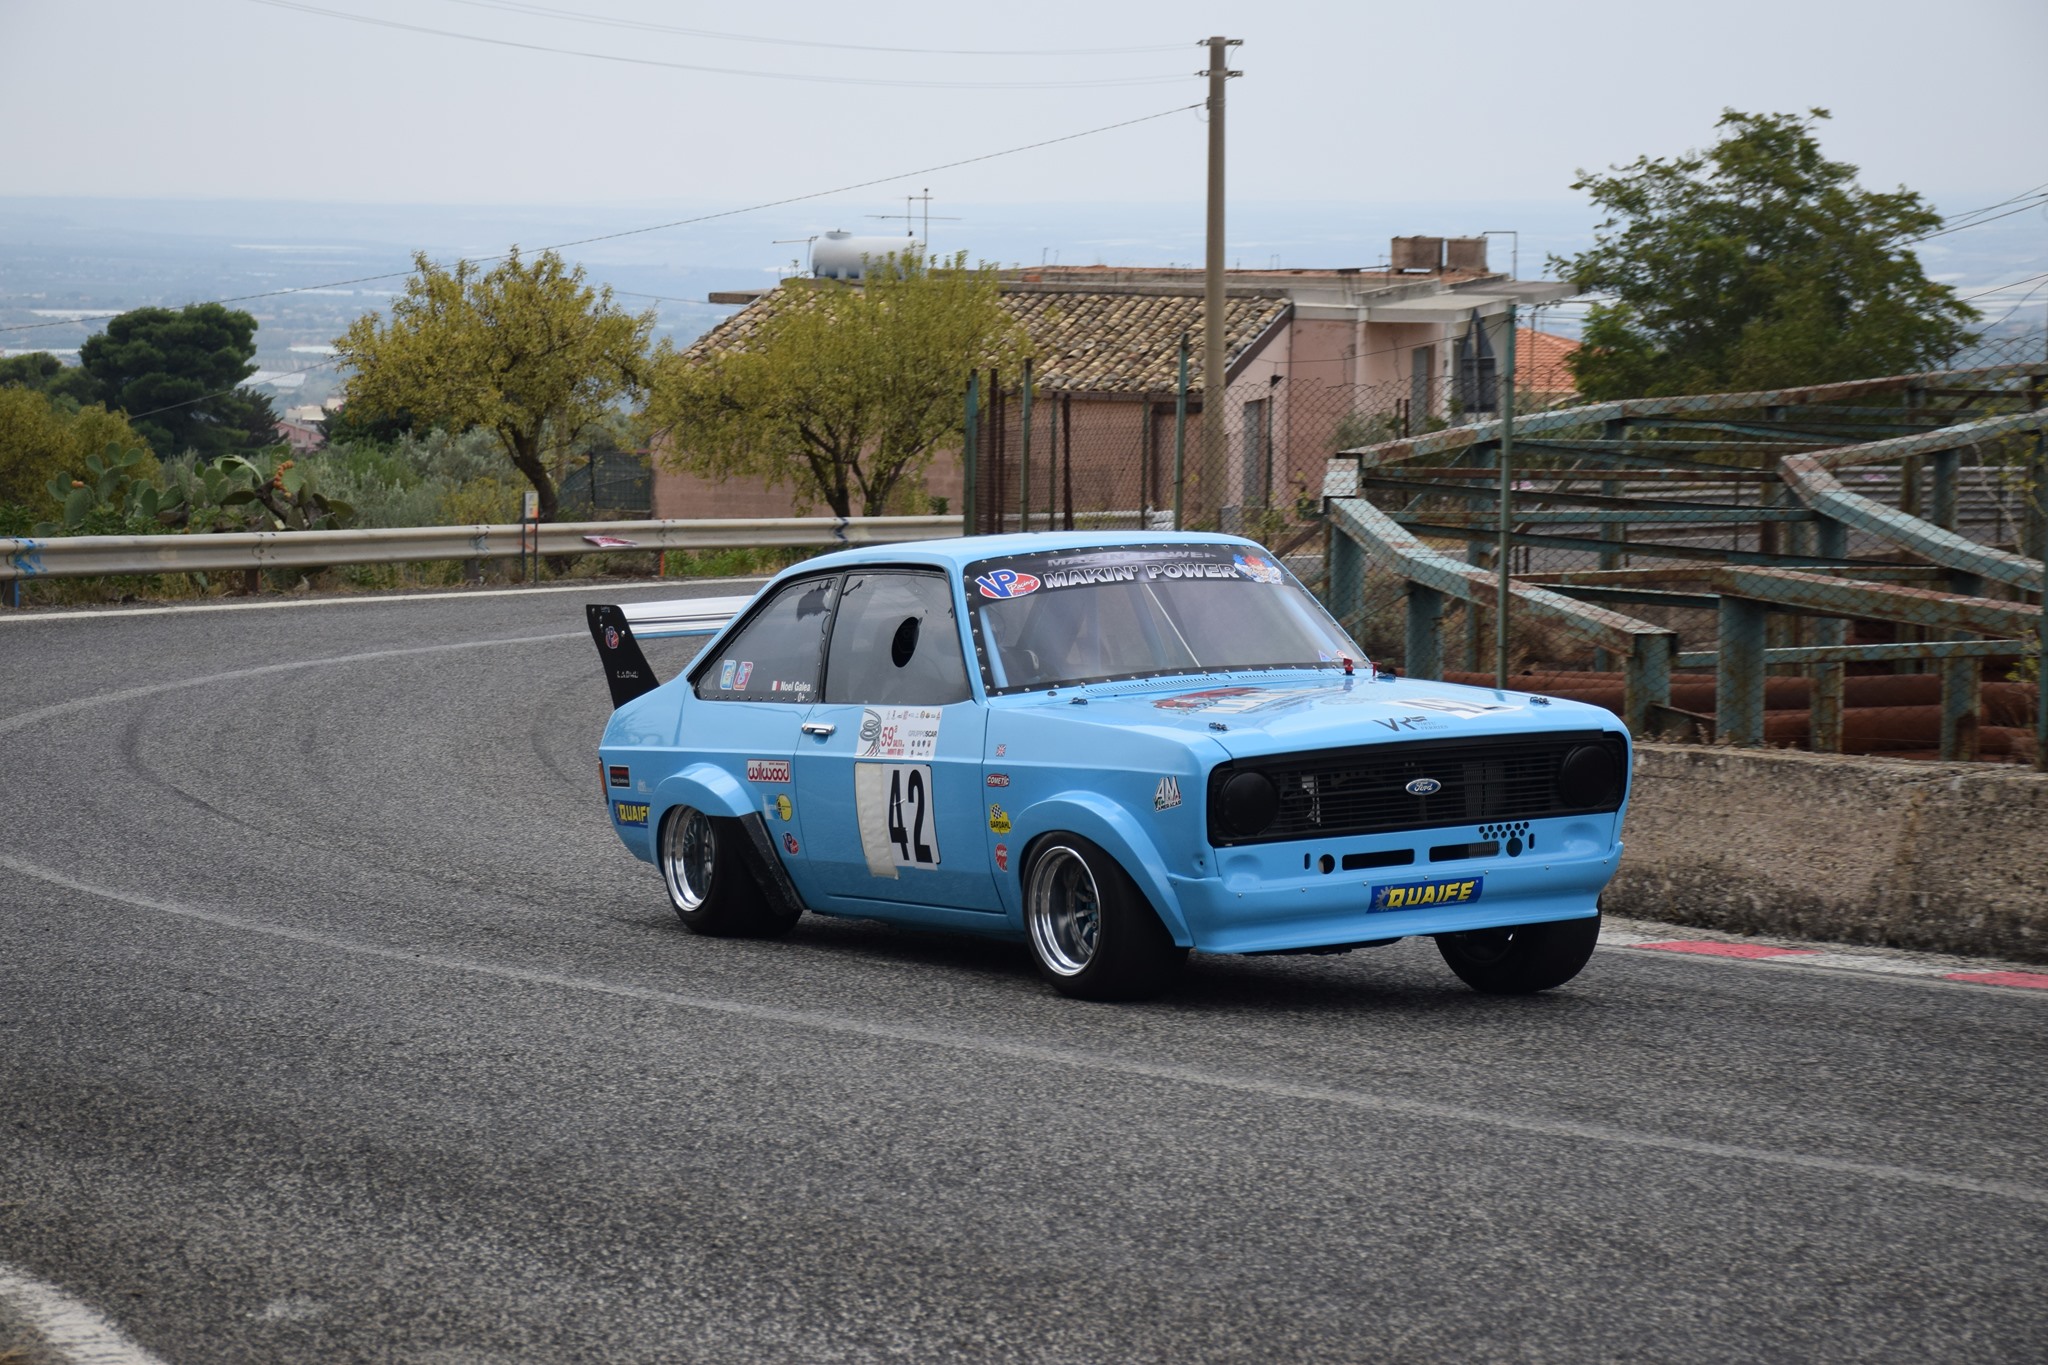 Six Maltese Drivers race at the 61st Edition of Monte Erice.